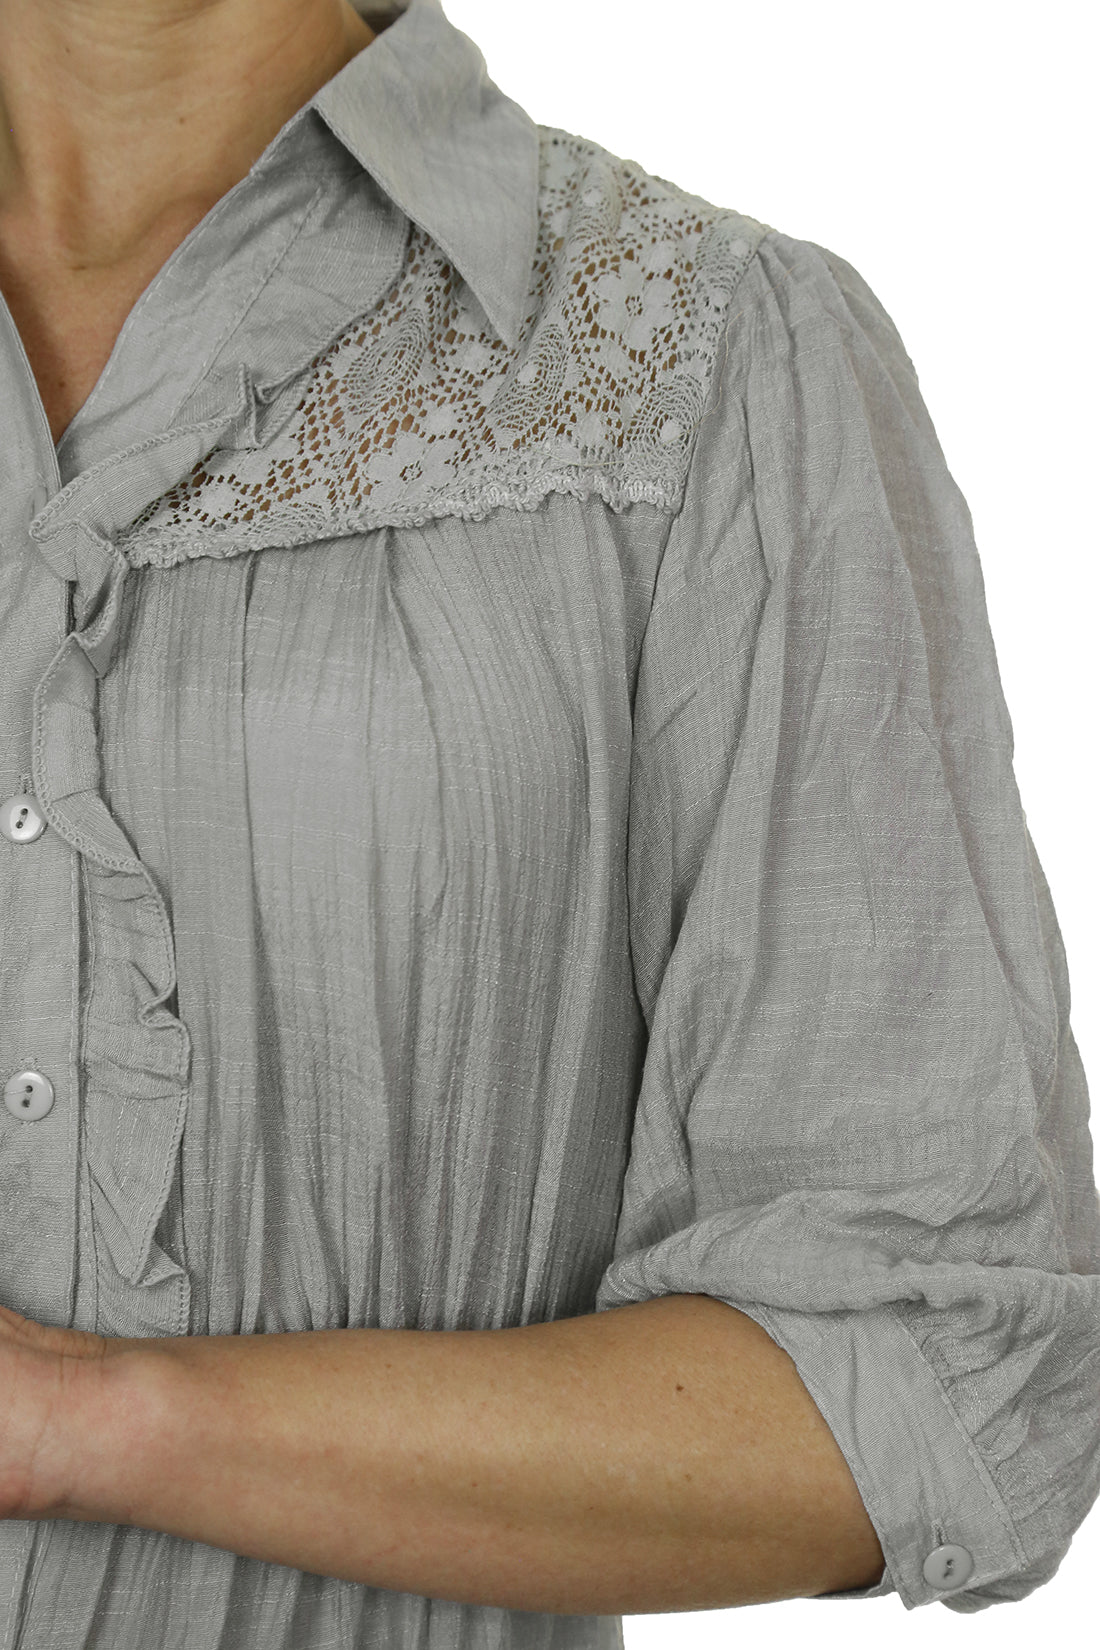 Crochet Lace Shirt Top With Frill Detail Silver Grey